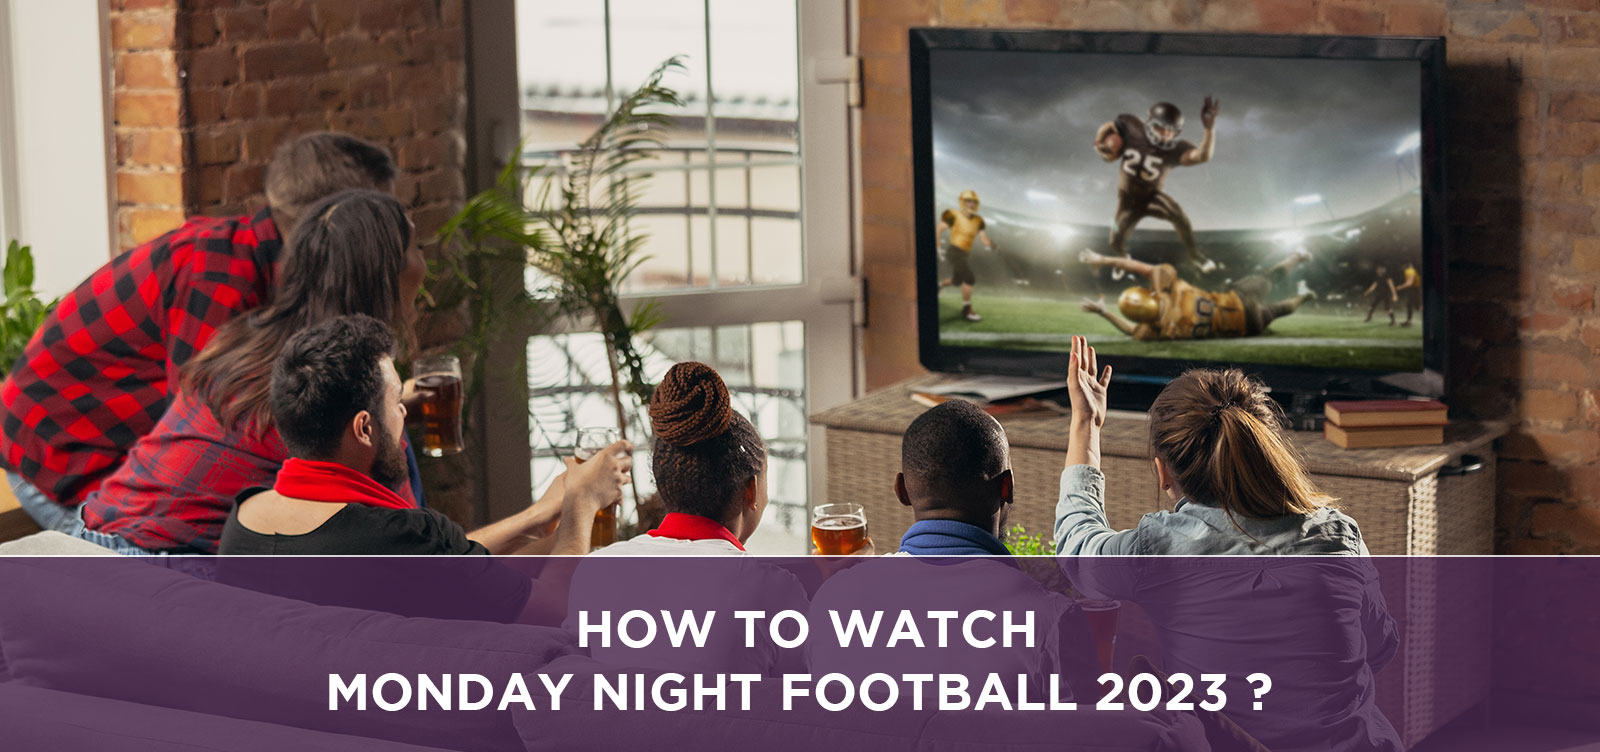 How to watch Monday night football 2023?